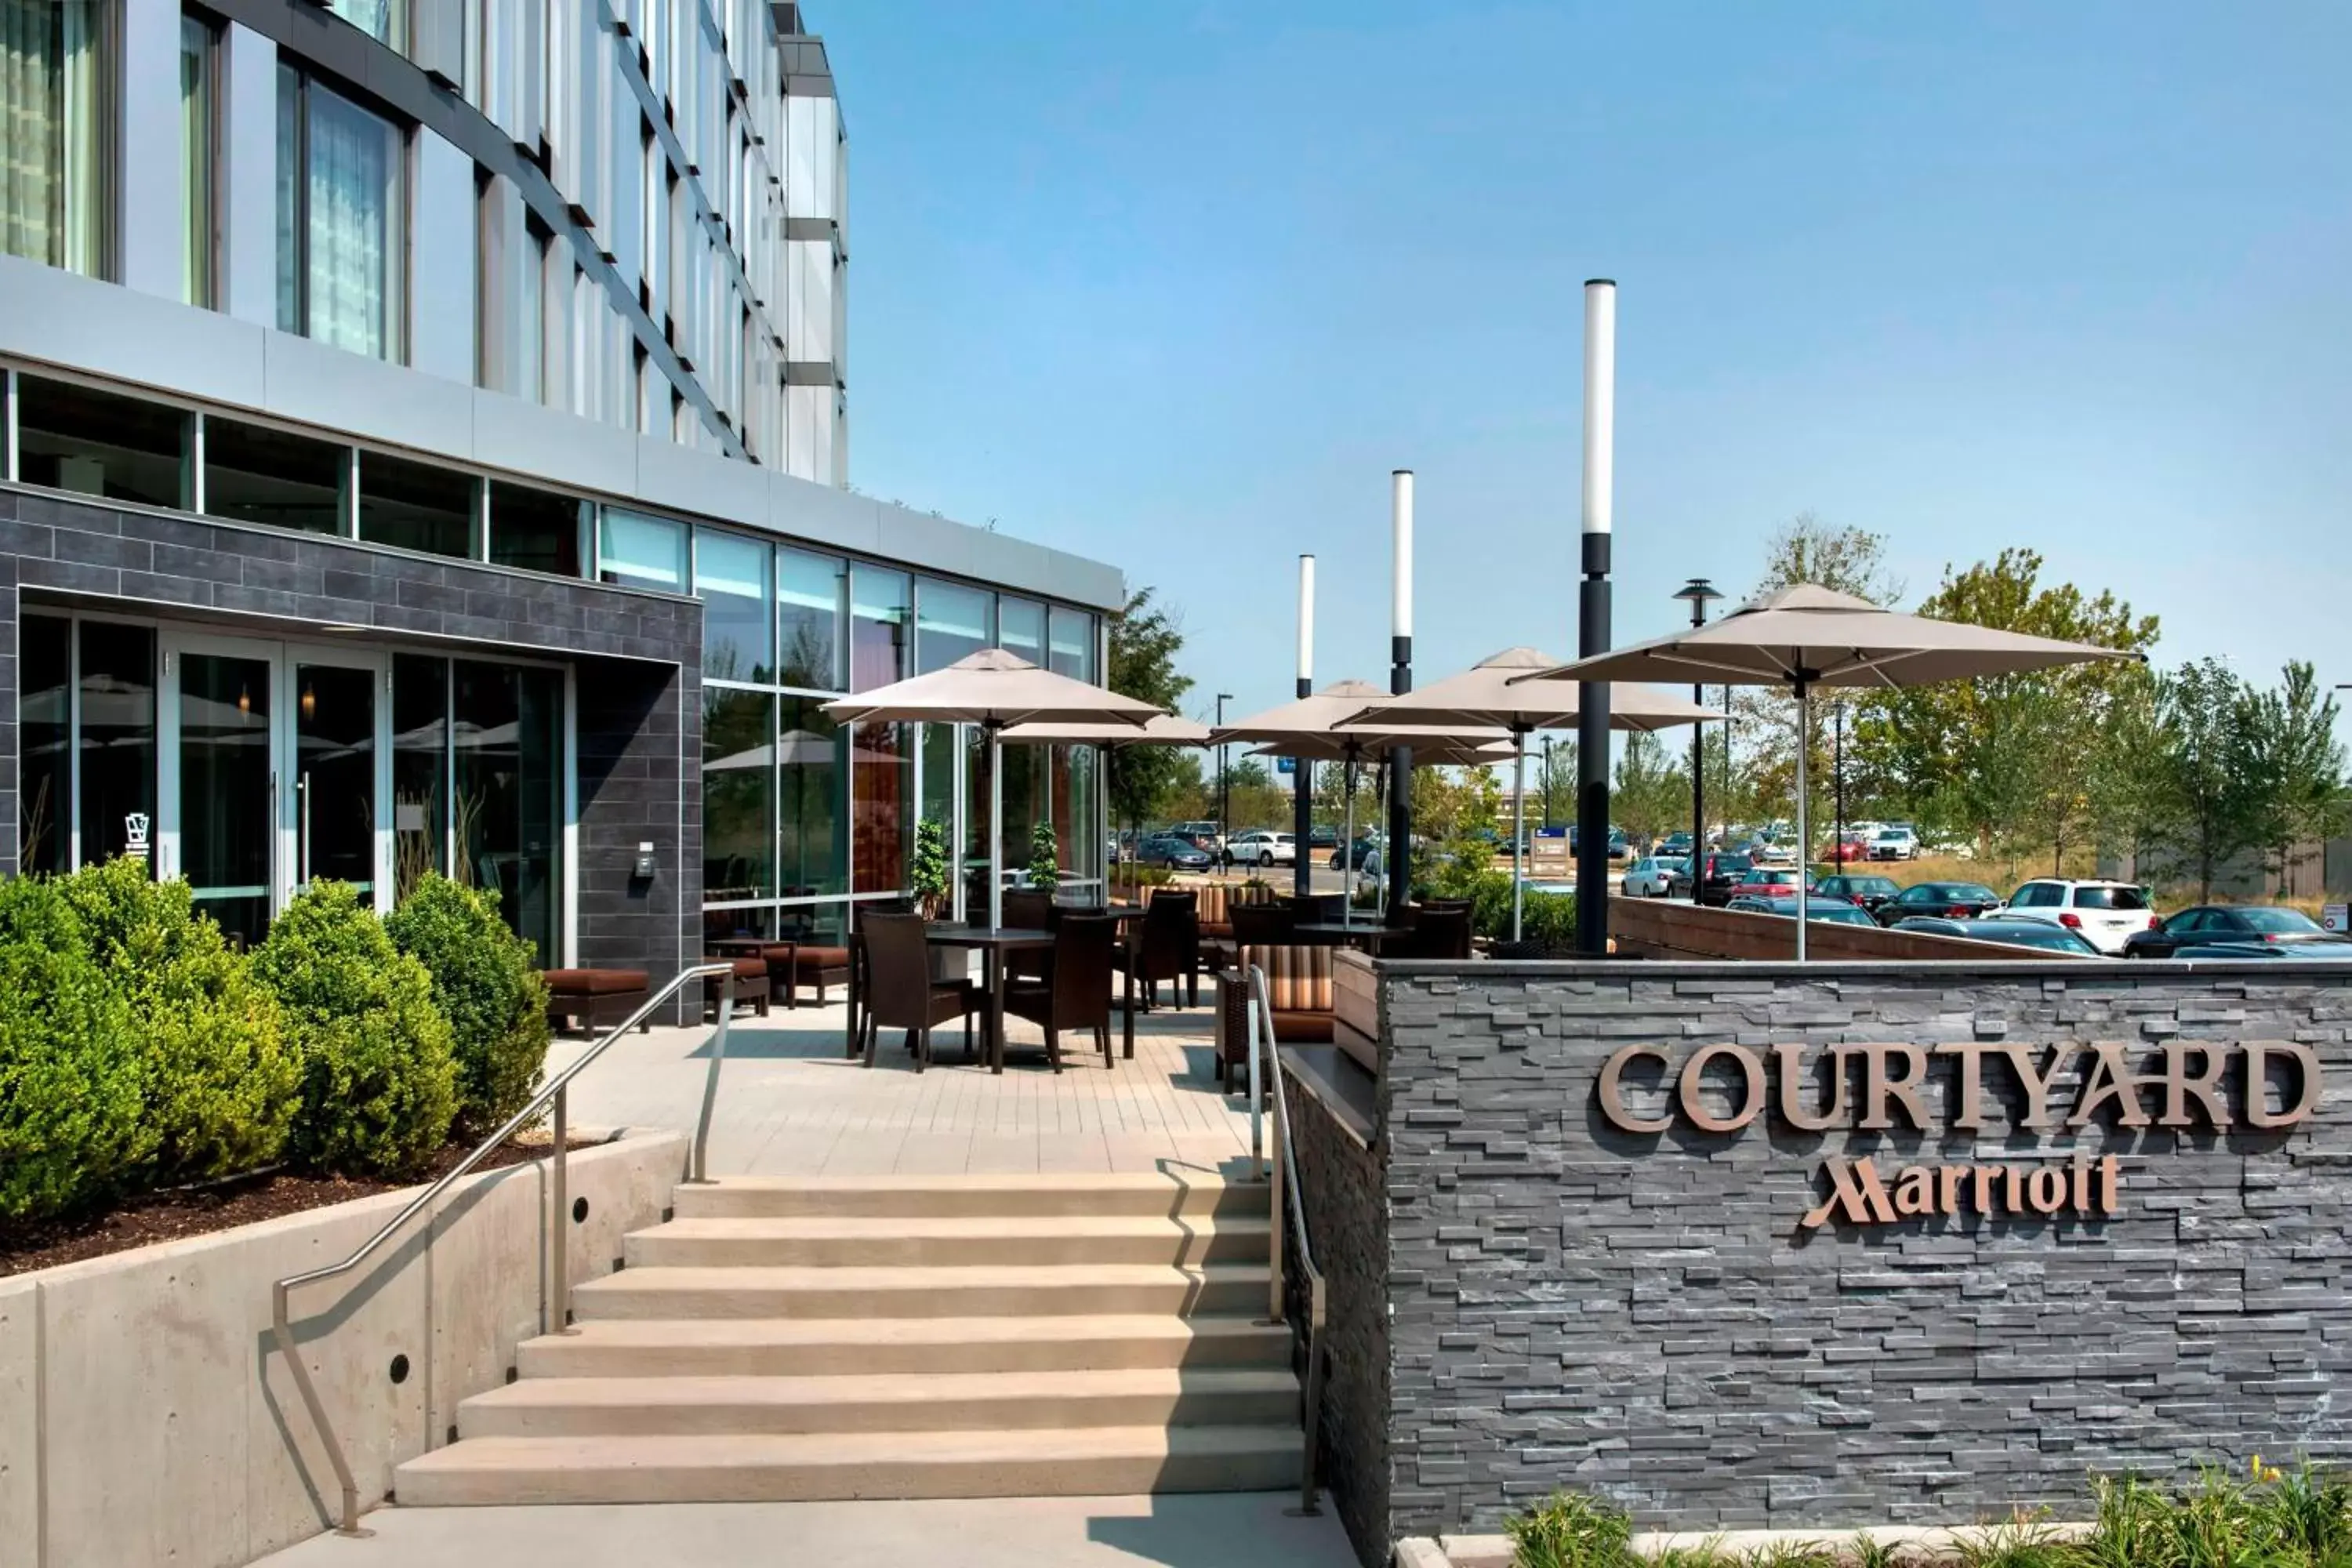 Property building in Courtyard by Marriott Philadelphia South at The Navy Yard